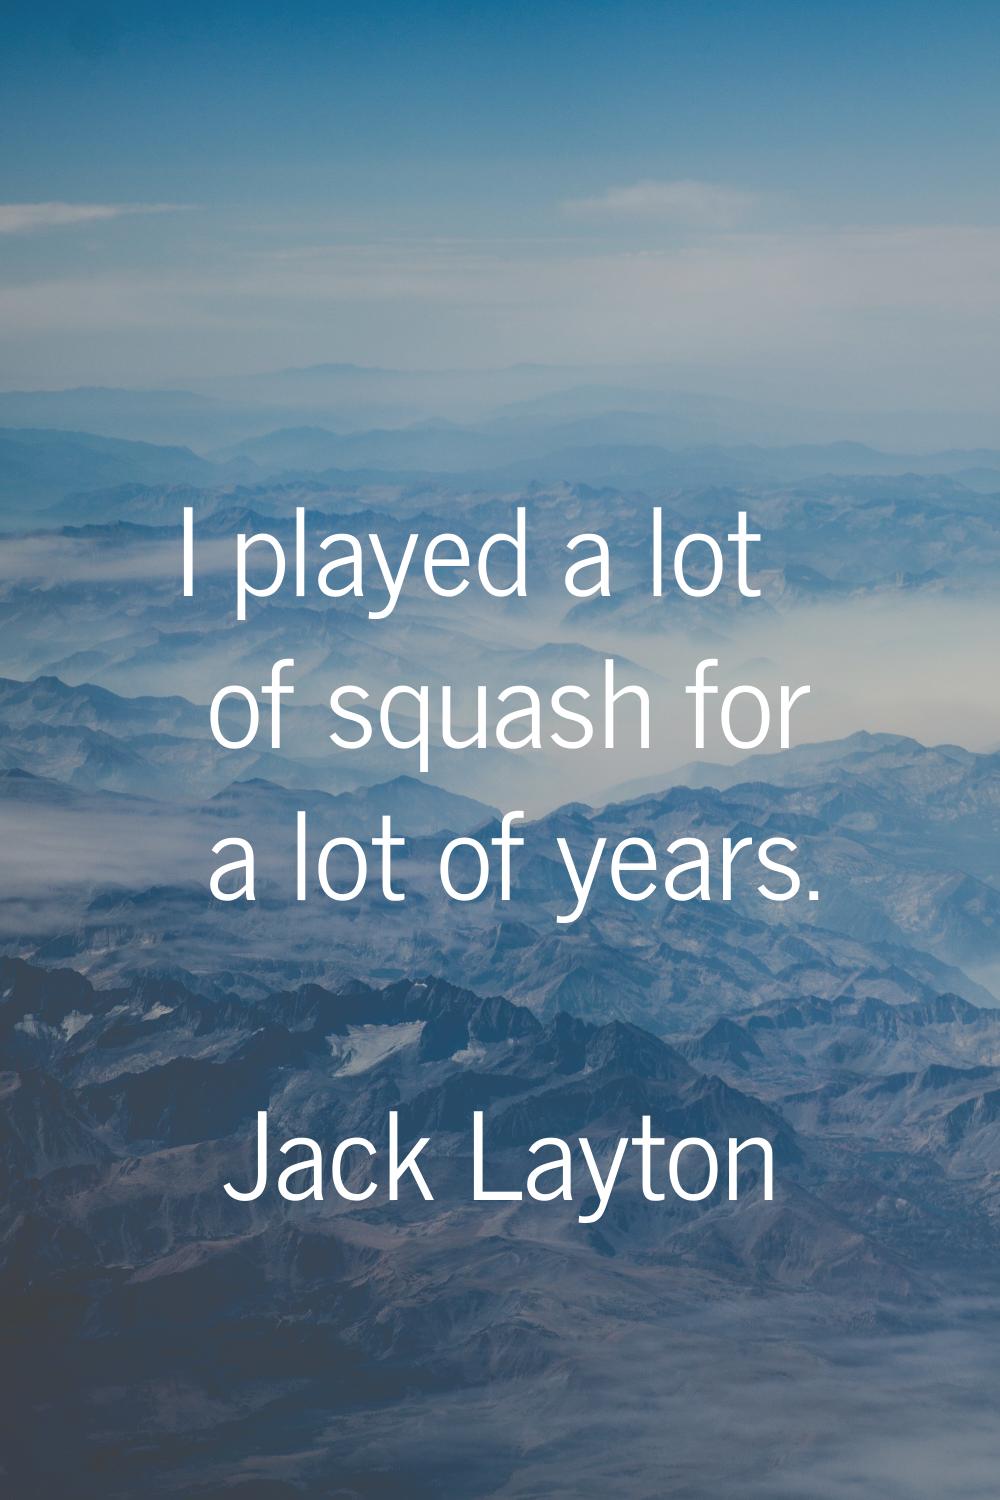 I played a lot of squash for a lot of years.